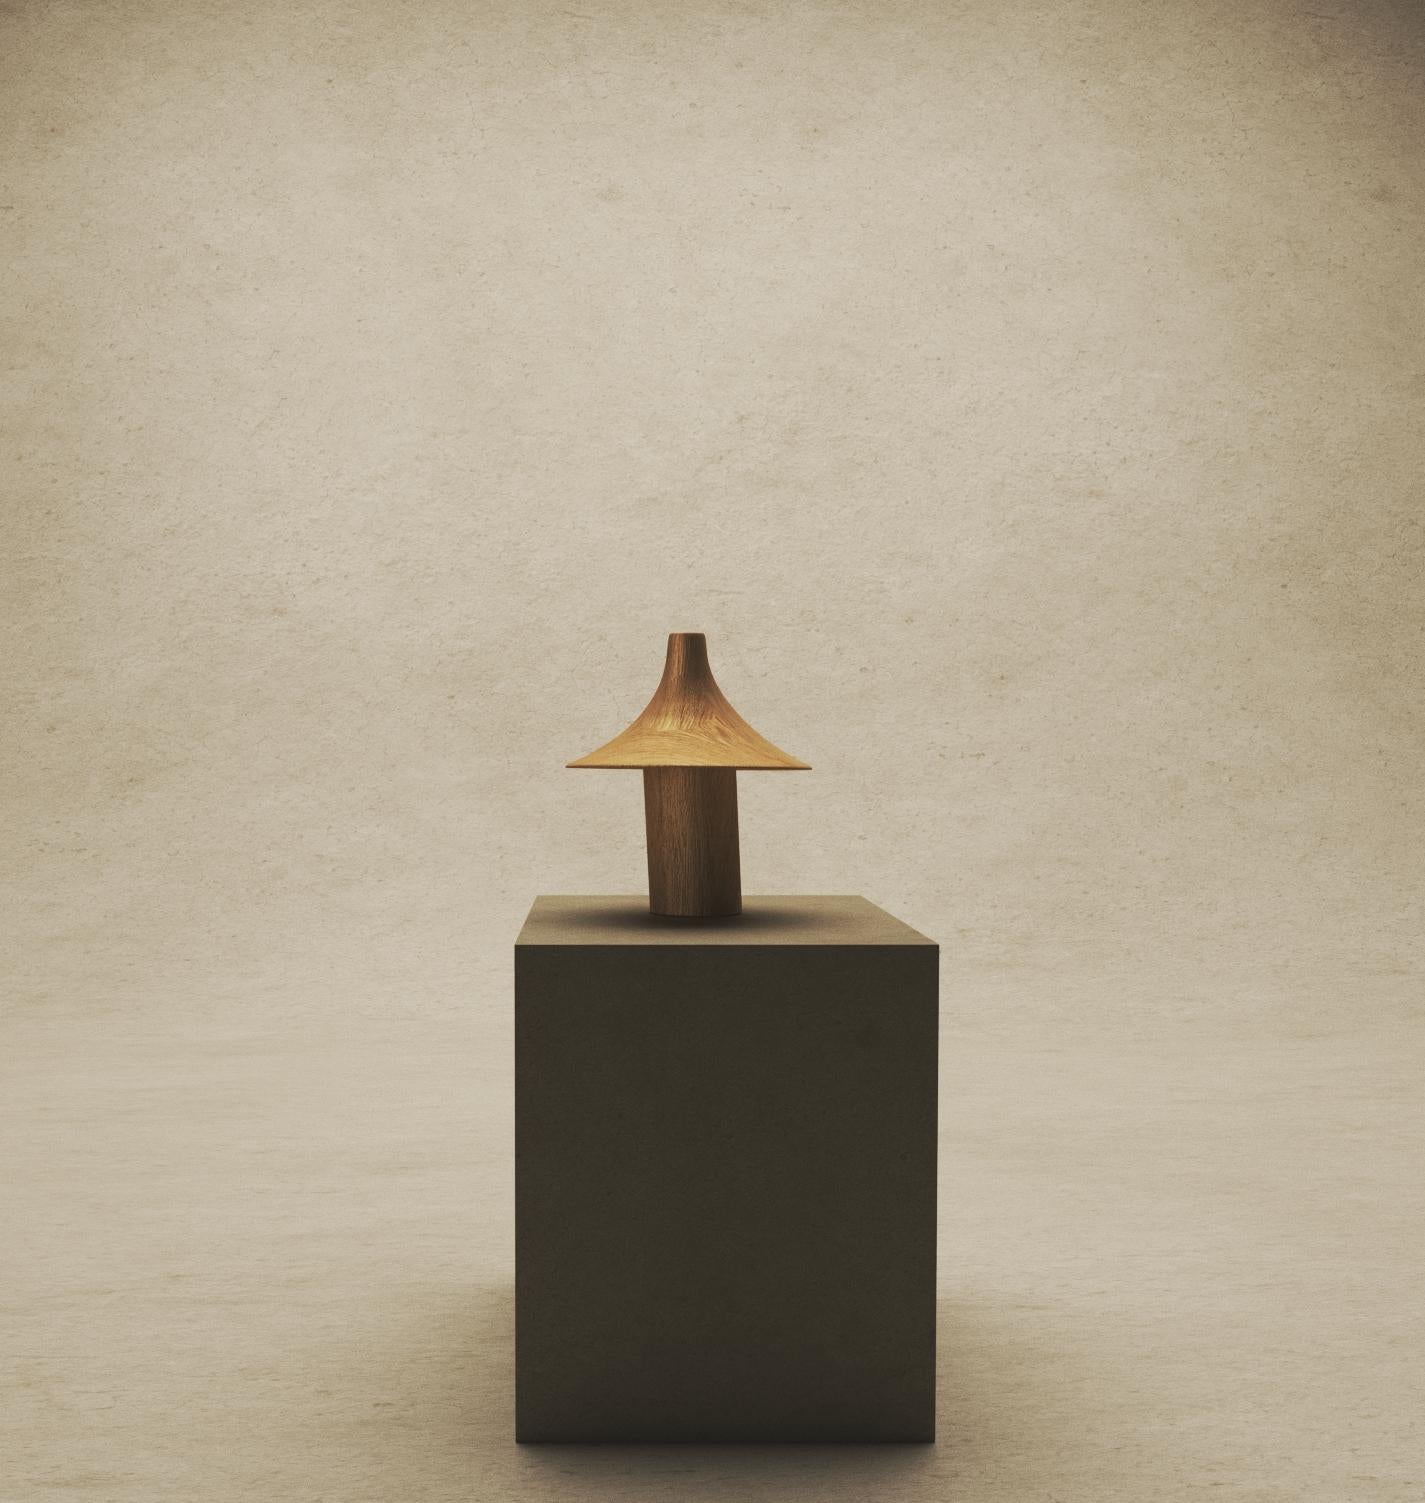 Small the hat lamp by Kilzi
Dimensions: D 16 x W 17 x H 23 cm. 
Materials: oak, cherry and meranti wood.
Materials may vary.

All our lamps can be wired according to each country. If sold to the USA it will be wired for the USA for